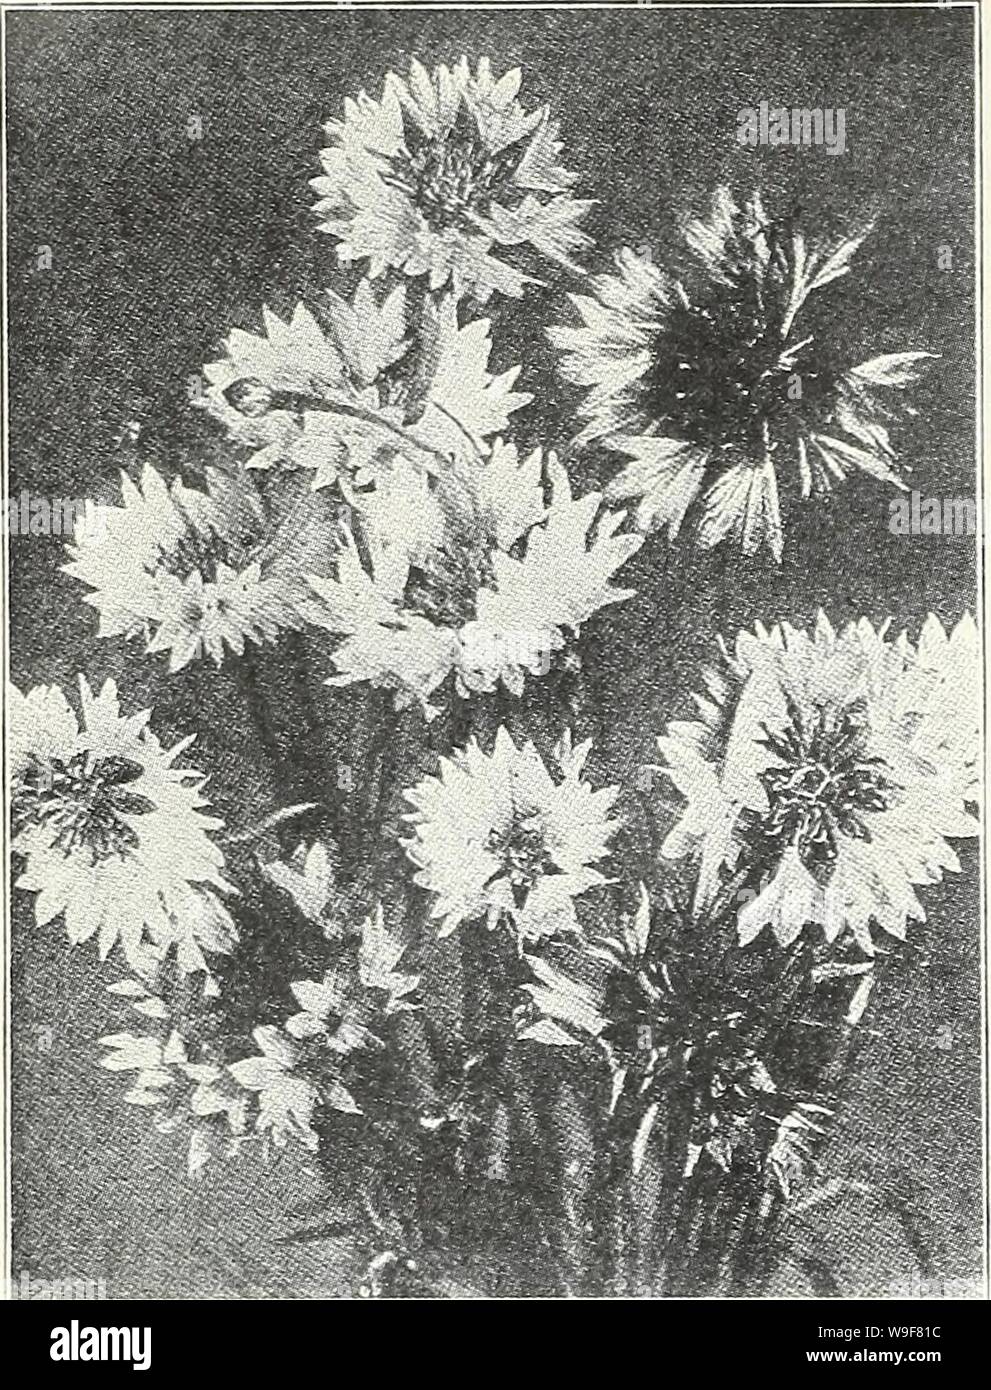 Archive image from page 21 of Currie's garden annual  spring. Currie's garden annual : spring 1934 59th year  curriesgardenann19curr 0 Year: 1934 ( Page 18 CURRIE BROTHERS CO., MILWAUKEE, WIS,    CHERIANTHUS ALLIONI (Siberian Wallflower)—A fine variety of hardy Wall- flower, used mostly as an annual having bright orange-colored flowers with dark green foliage; a splendid rock plant. Seeds, Pkt., 10c LINIFOLIUS (Alpine Wallflower)—Forms compact plants about 9 inches high with numerous small spikes of bright mauve flowers, makes a very neat line. 50c per . oz. ; 15c Pkt. CLARKIA Handsome annual Stock Photo